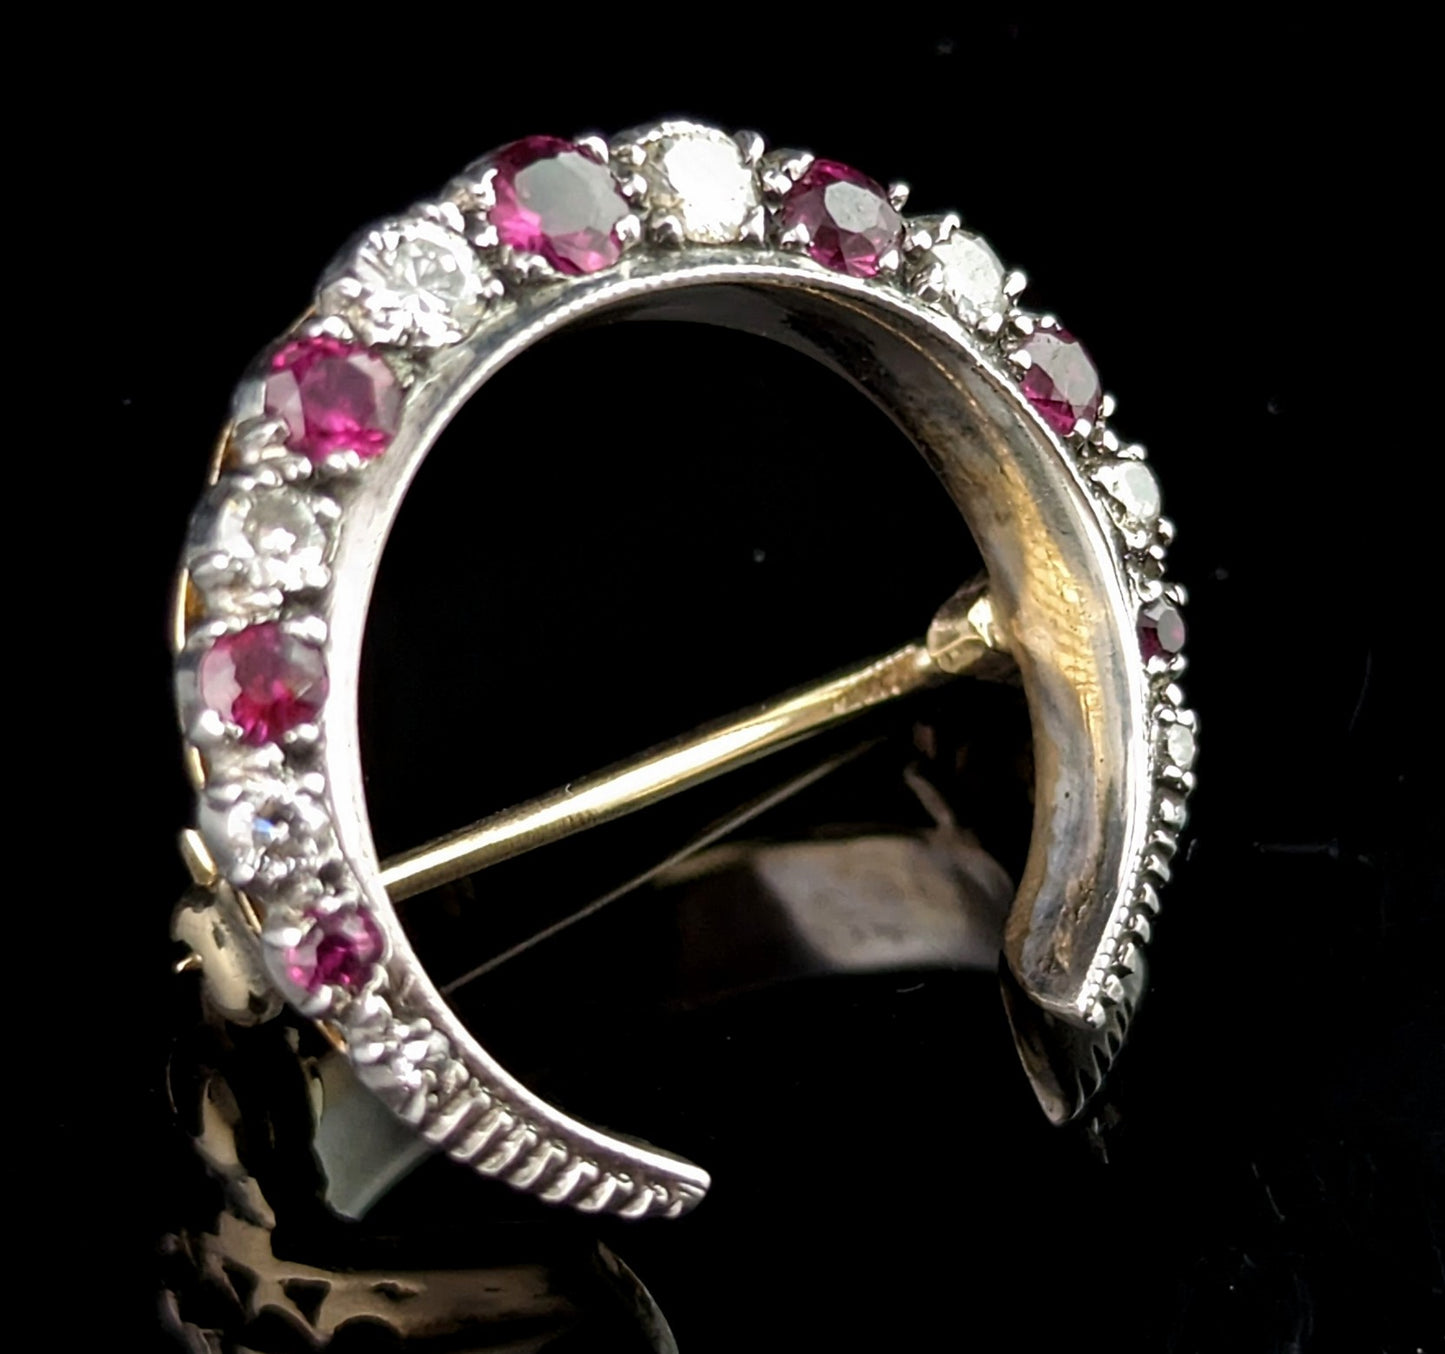 Antique Ruby and Diamond crescent brooch, silver and 9k gold